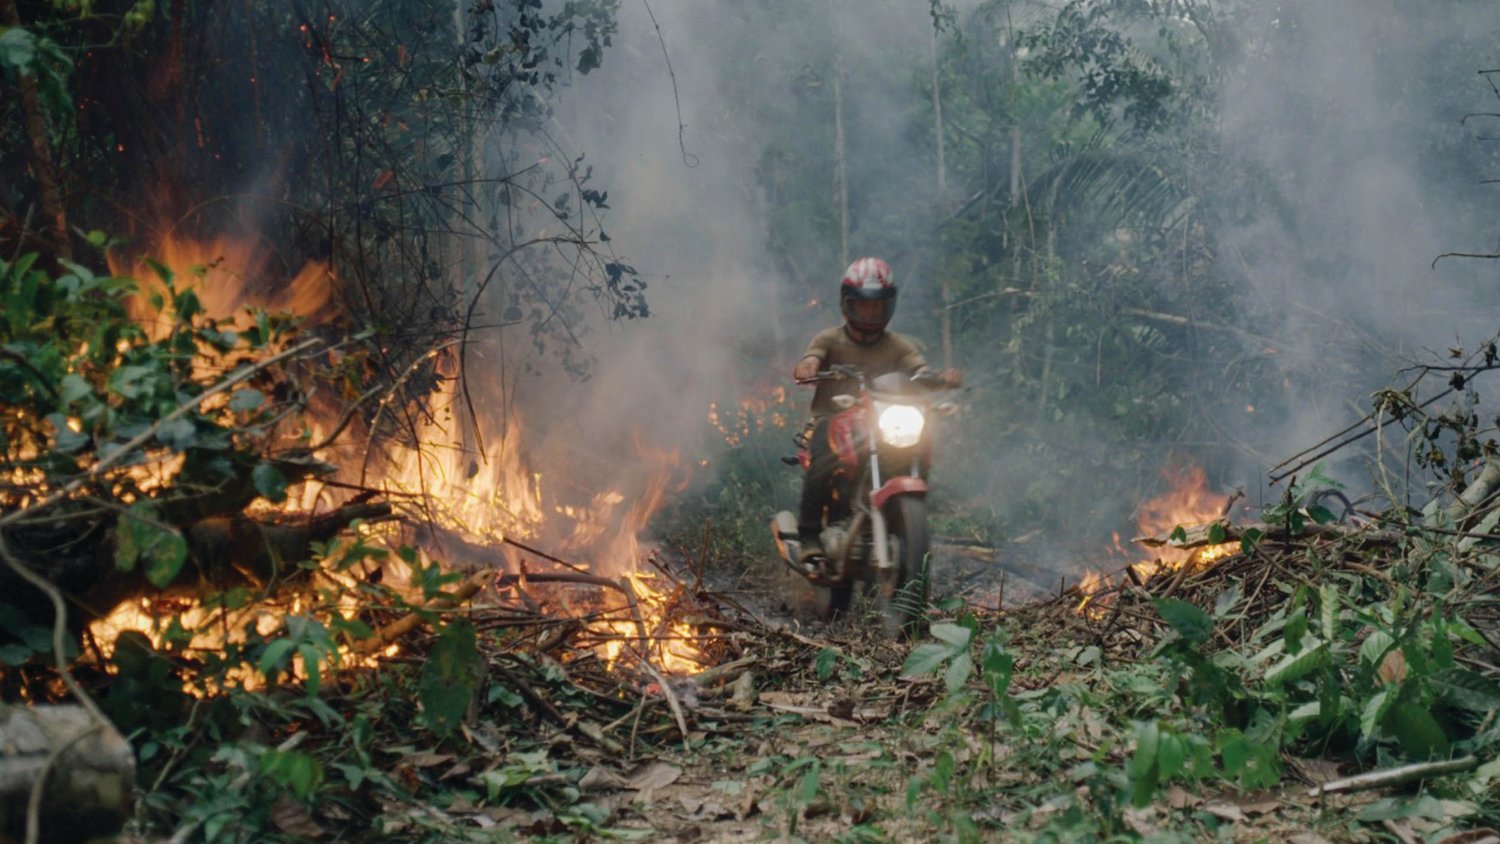 “The Territory” offers an immersive look at the fight of the Indigenous Uru-eu-wau-wau people against deforestation and illegal settlers in the Brazilian Amazon.